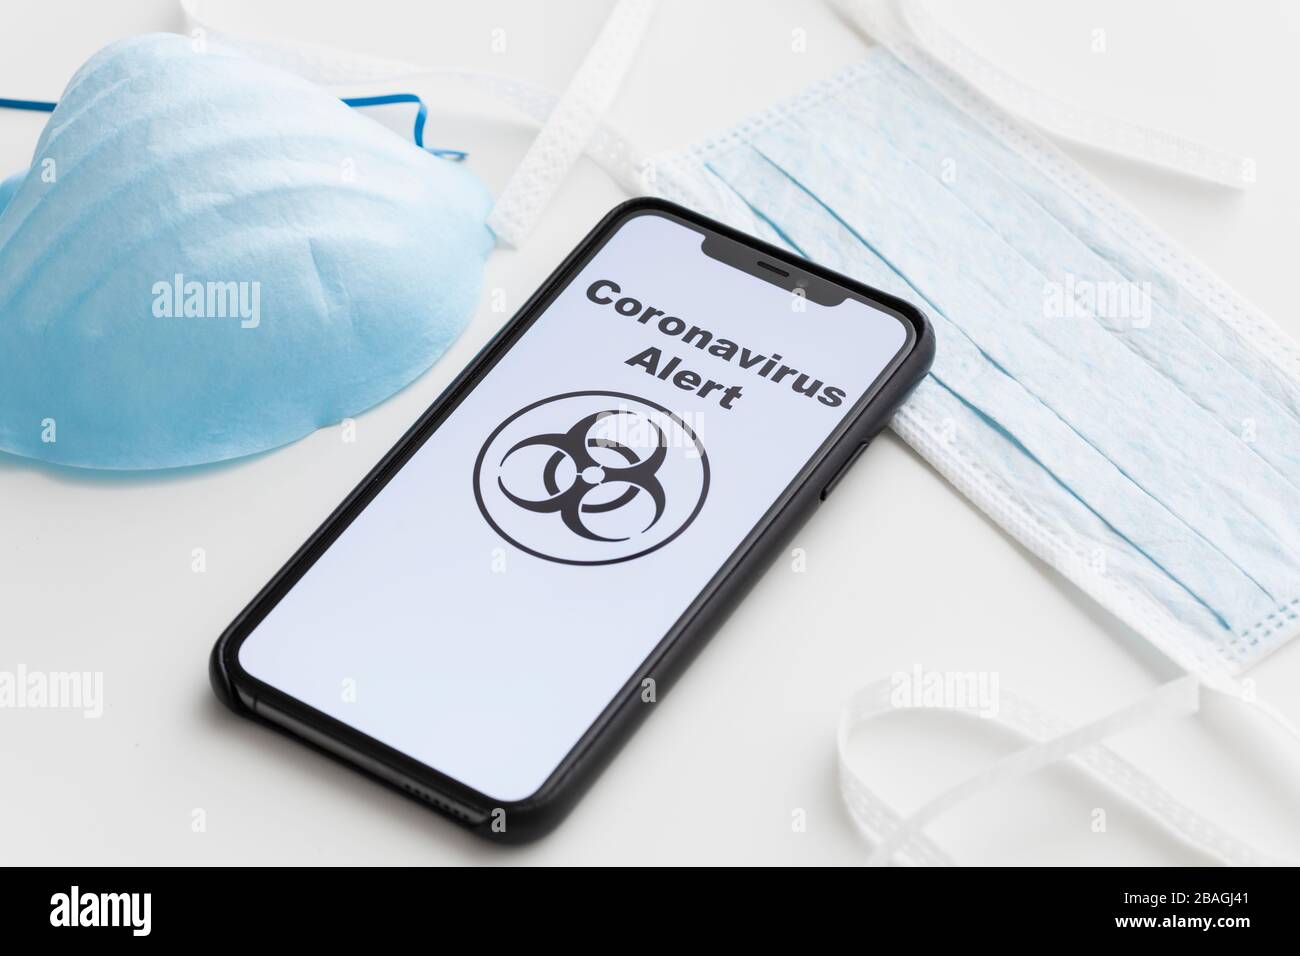 Coronavirus alert on cell phone with surgical masks Stock Photo